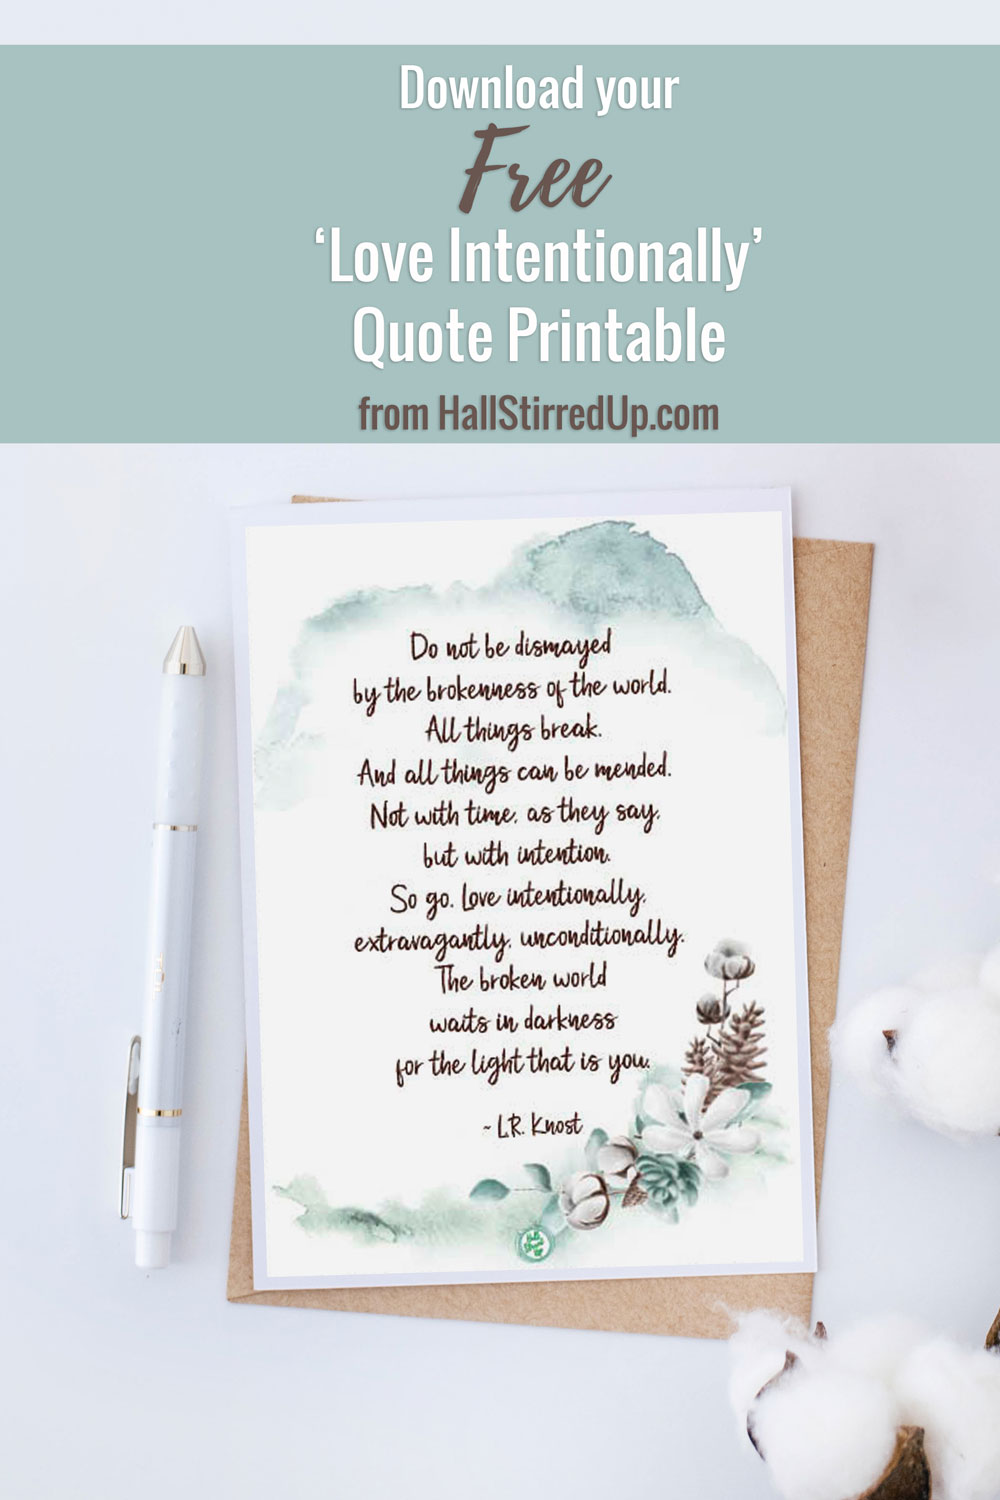 Love Intentionally! Inspiration includes a free printable